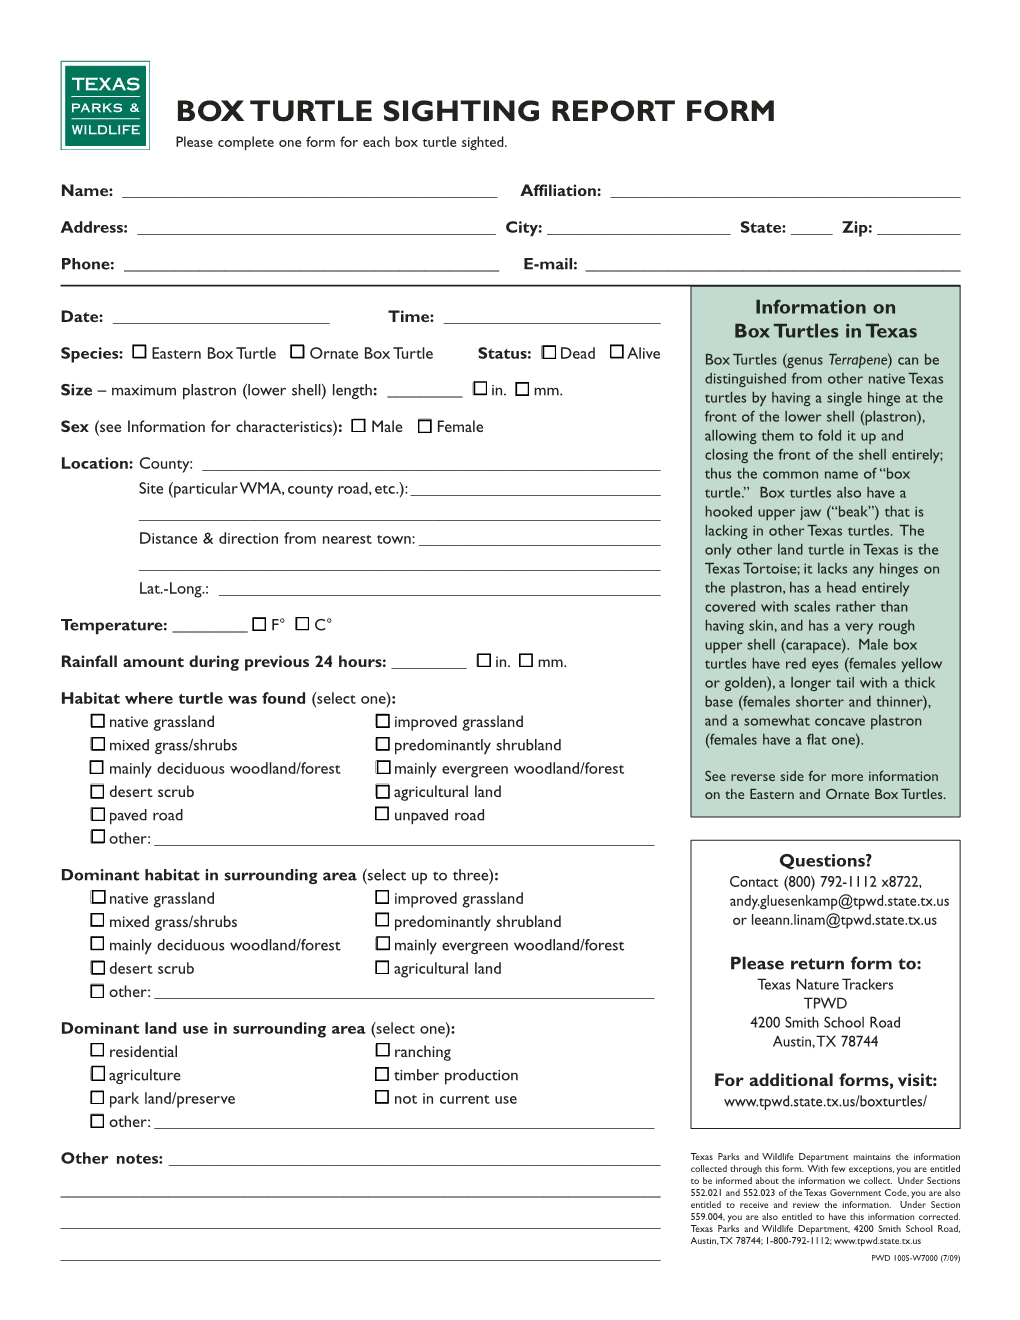 Box Turtle Sighting Report Form, PWD 1005